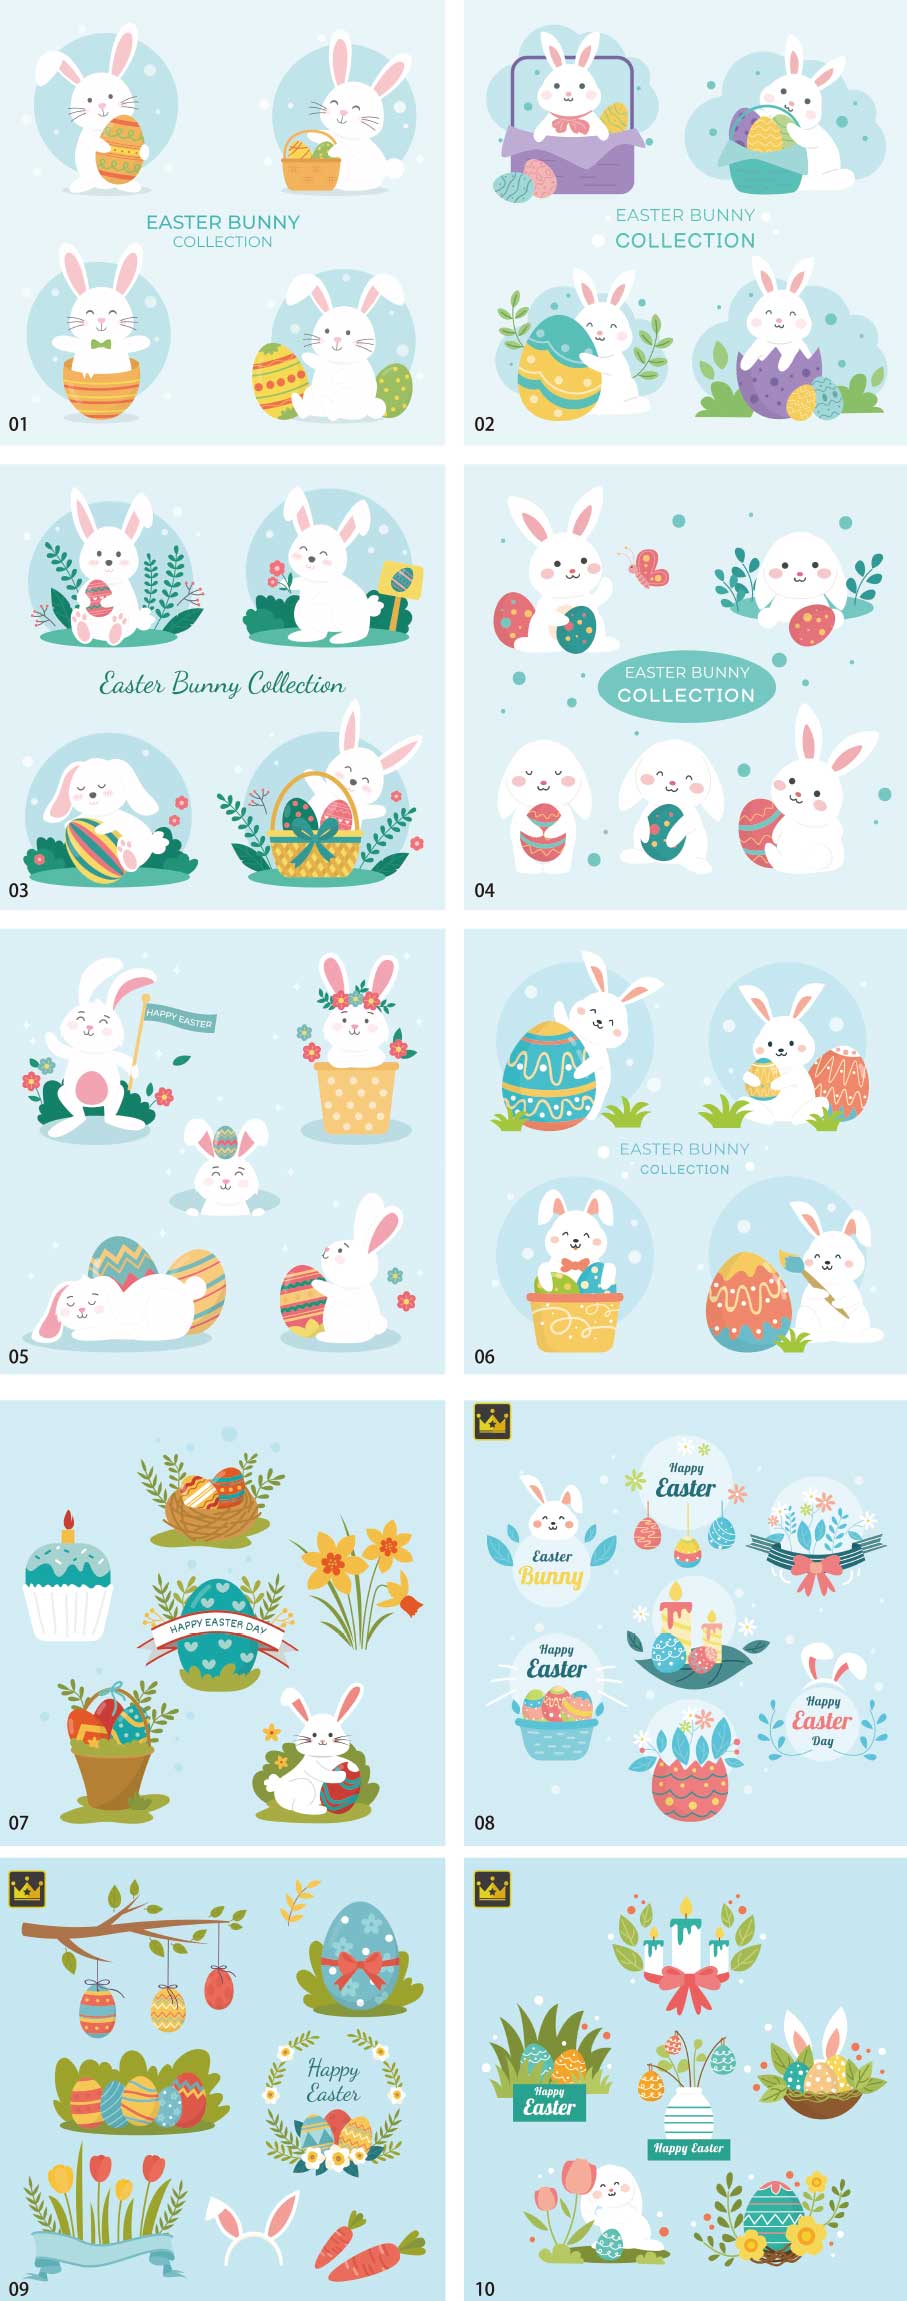 Easter illustration collection